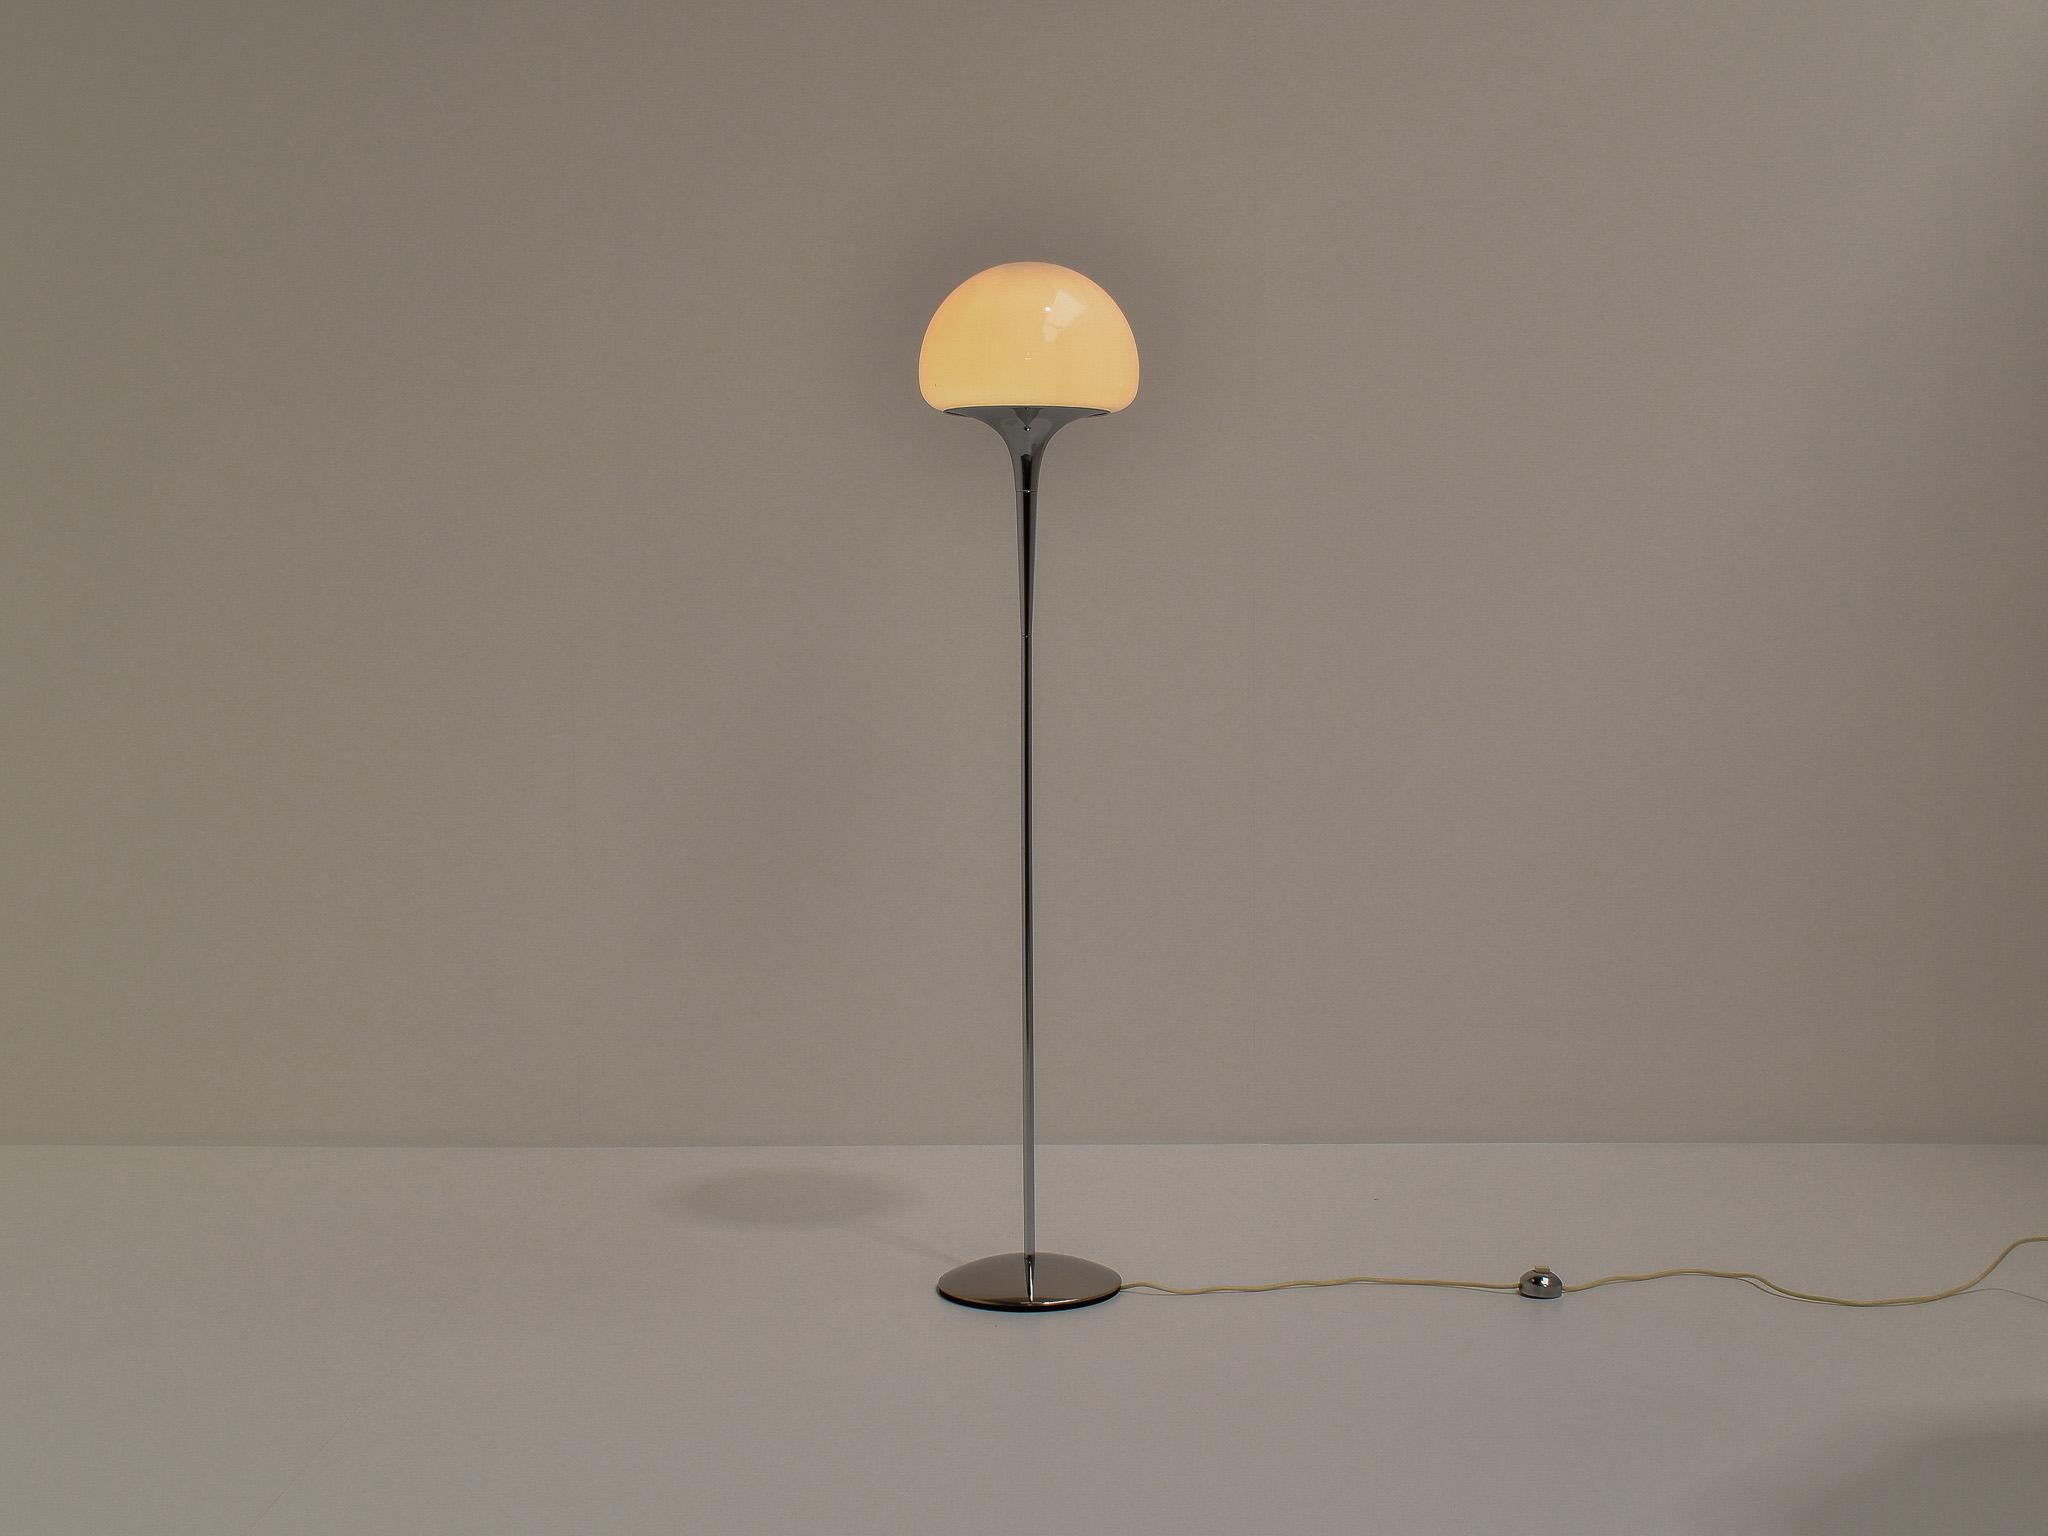 Elegant Italian floor lamp, designed ca 1970s, in excellent original condition. 
Designed by Reggiani, who is a famous and renowed italian designer. This model is lesser seen.

The lamp is very elegant, almost delicate due to its long and lean